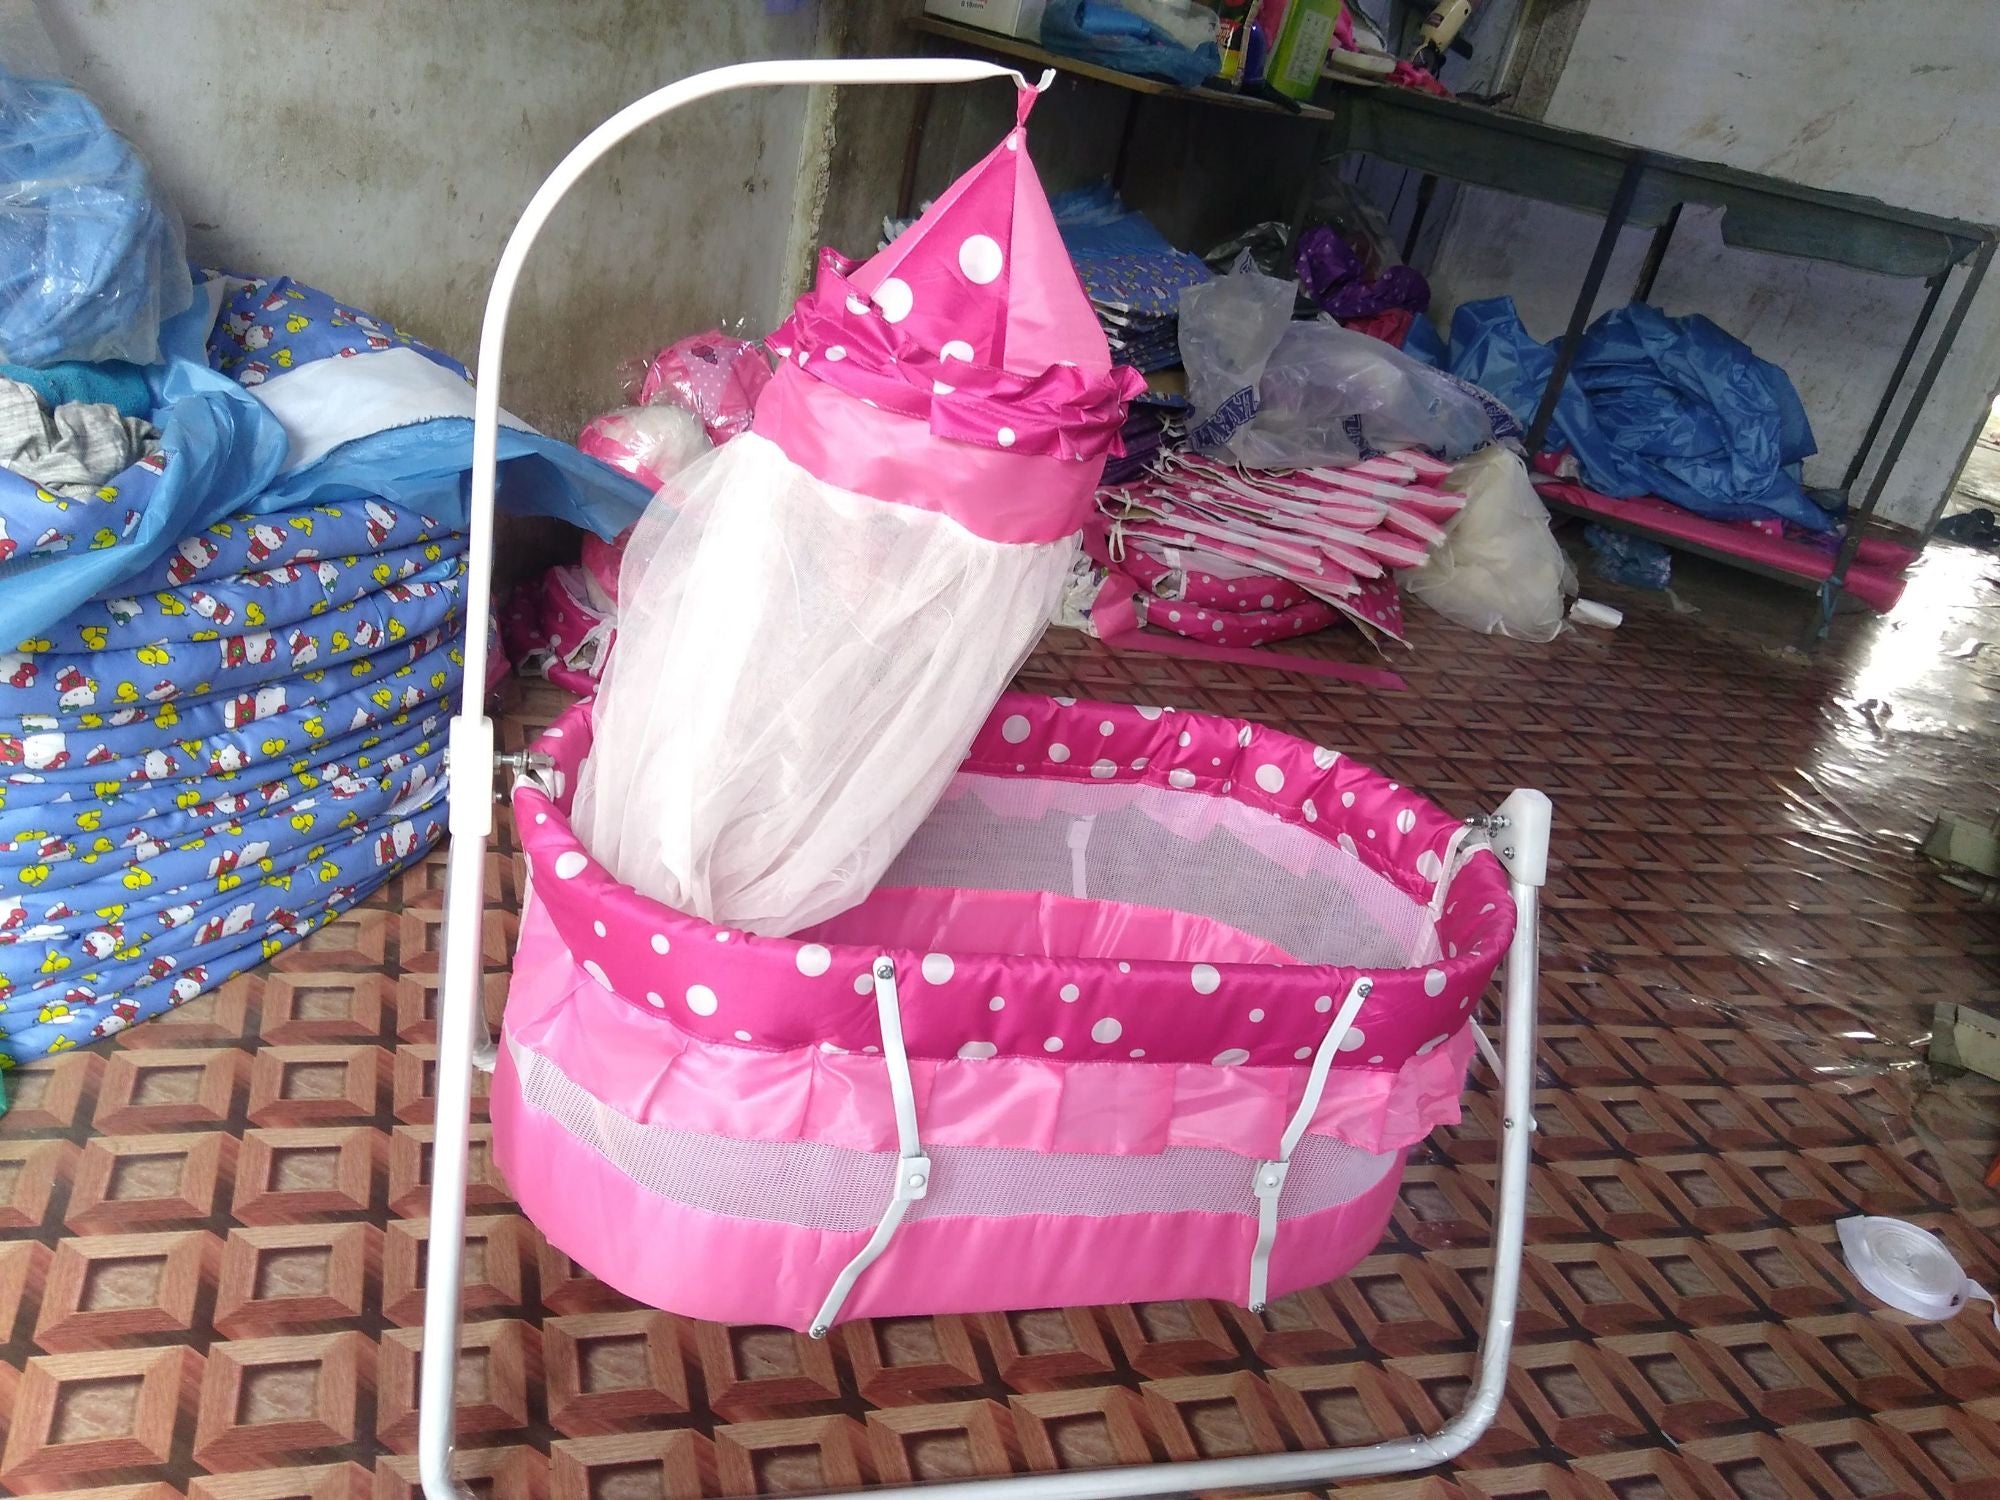 Baby Swing Cot Cradle Dual Stands Support along with Mosquito Net - Baby Swing Cot Cradle Dual Stands Support along with Mosquito Net - Kids Baby Jhula High Quality Portable Swing Baby - Baby Coat Multi Colour